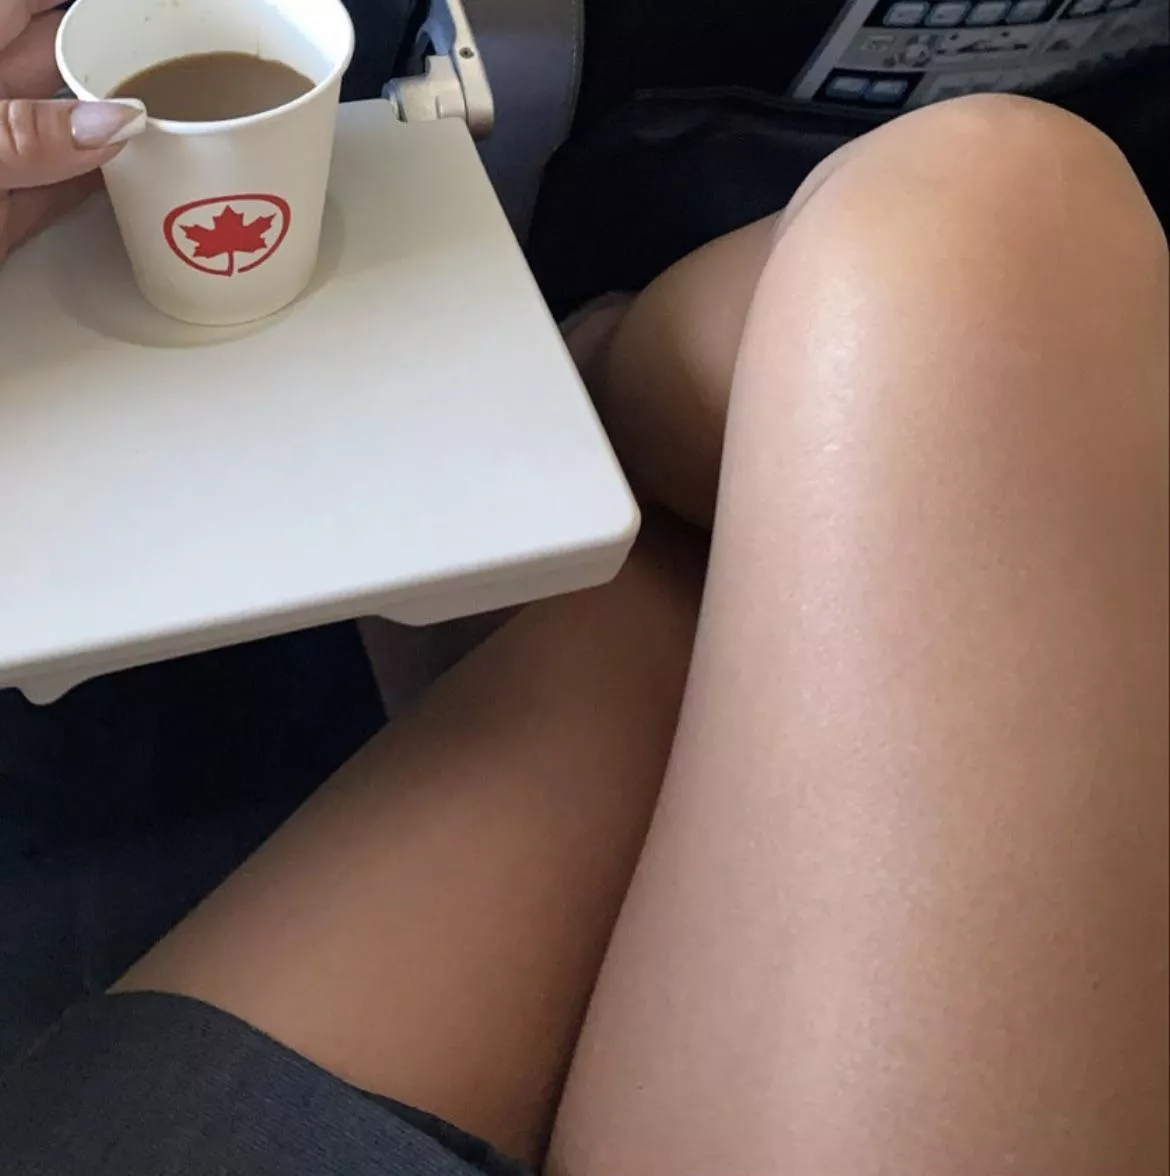 When Theres Turbulence And You Get To Sit Time For Tea Nudes